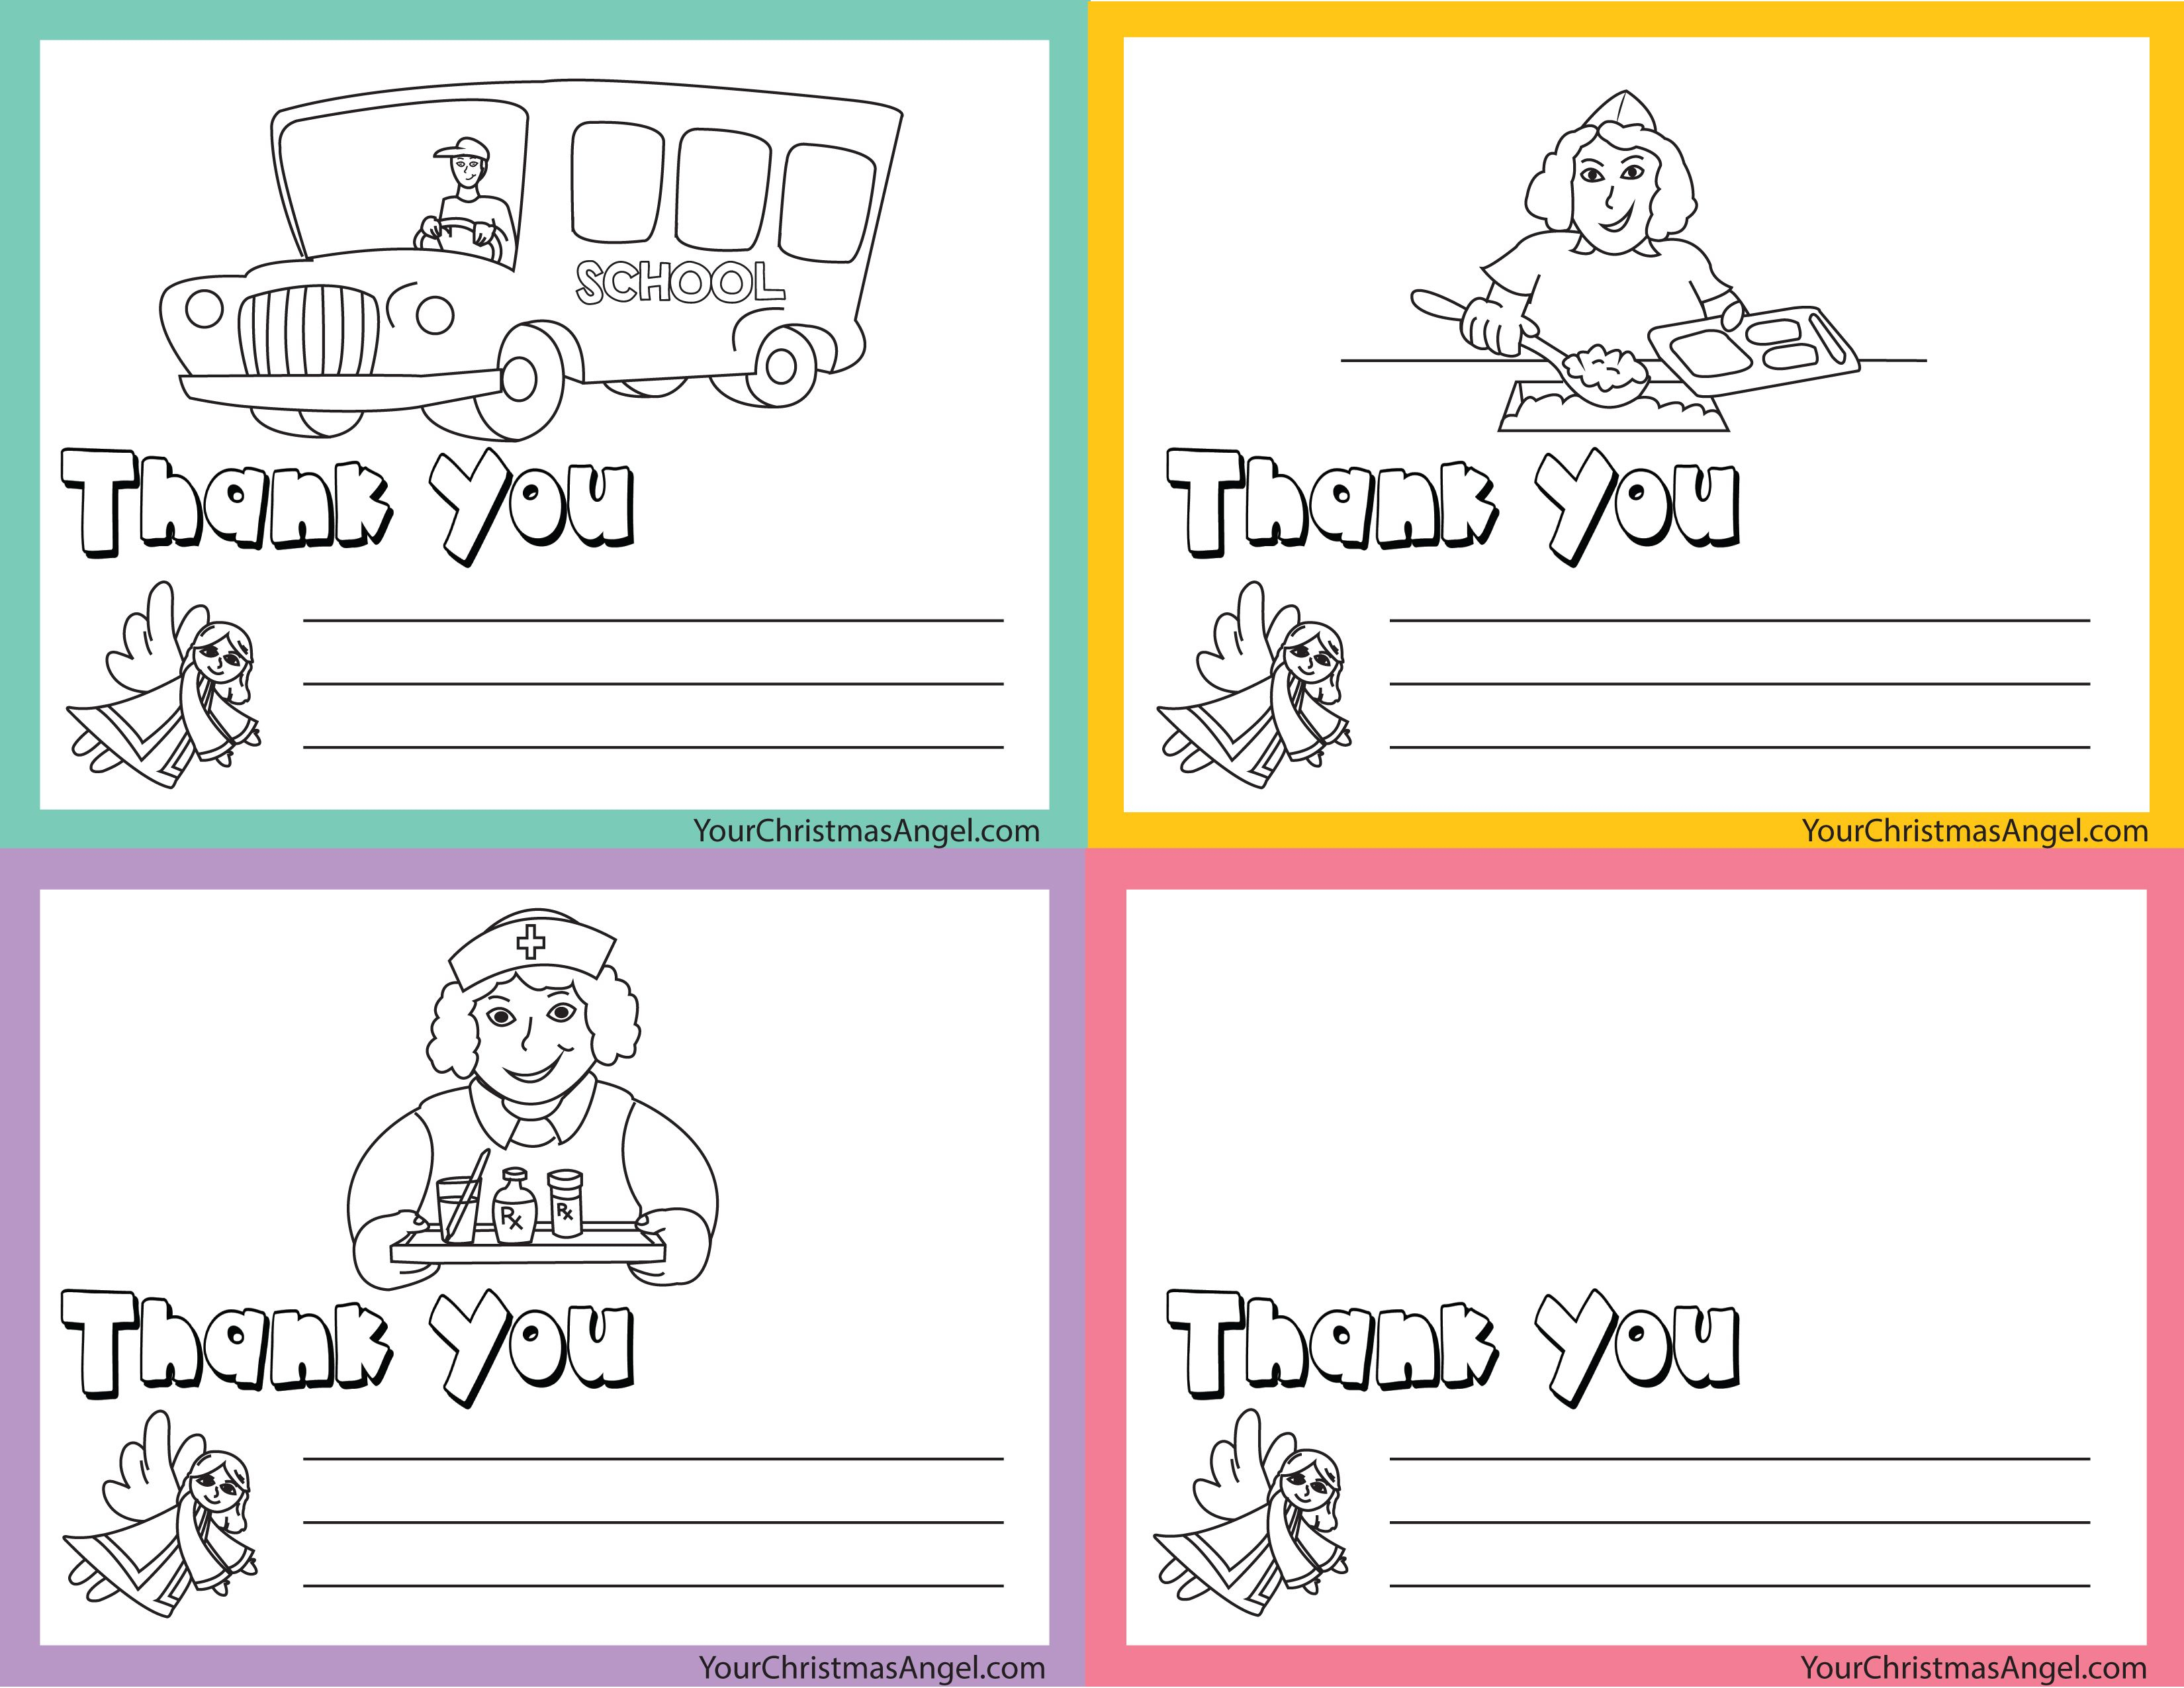 Thank You Cards For Those In Our School Systems!! Great For Teachers - Free Printable Volunteer Thank You Cards